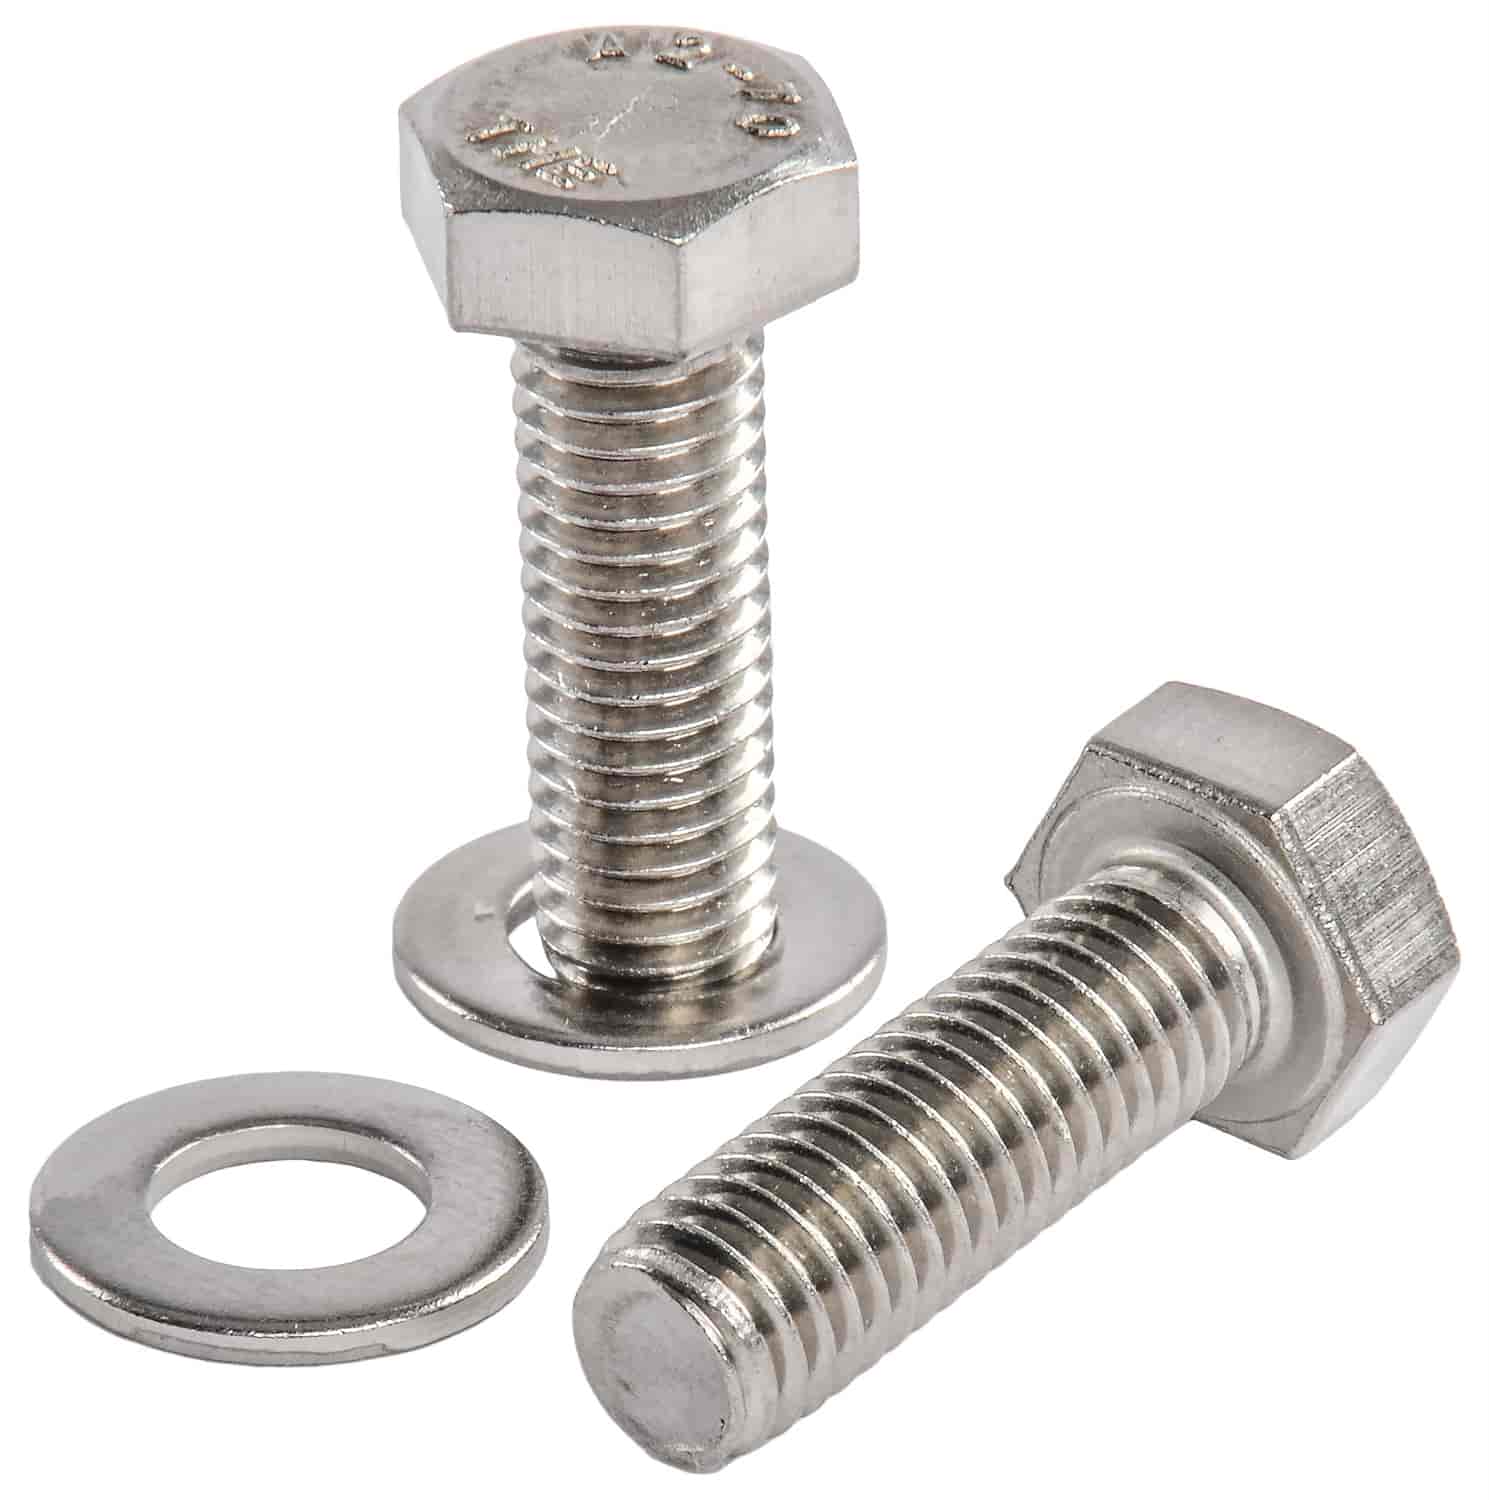 LS Rear Engine Cover Bolt Kit, Stainless Steel